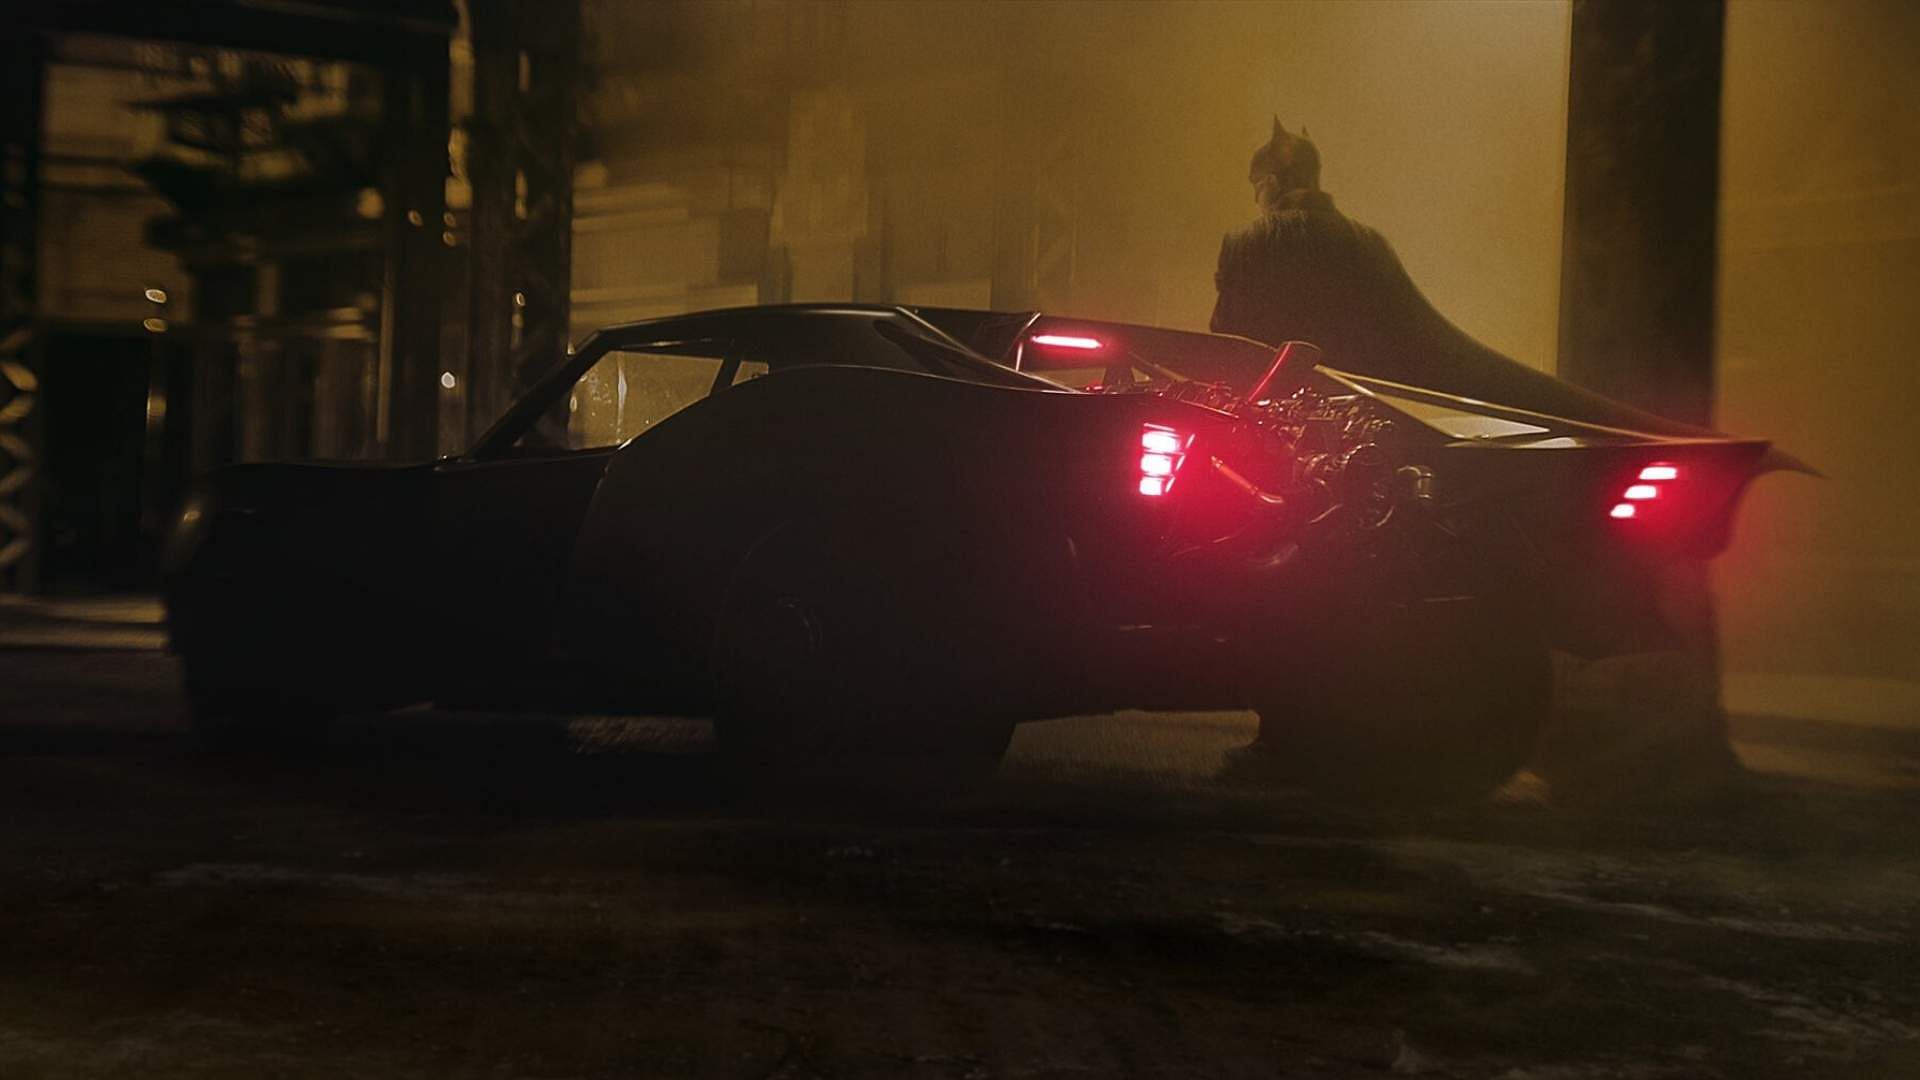 The first look of the Batmobile from the sets of <i>The Batman</i>.